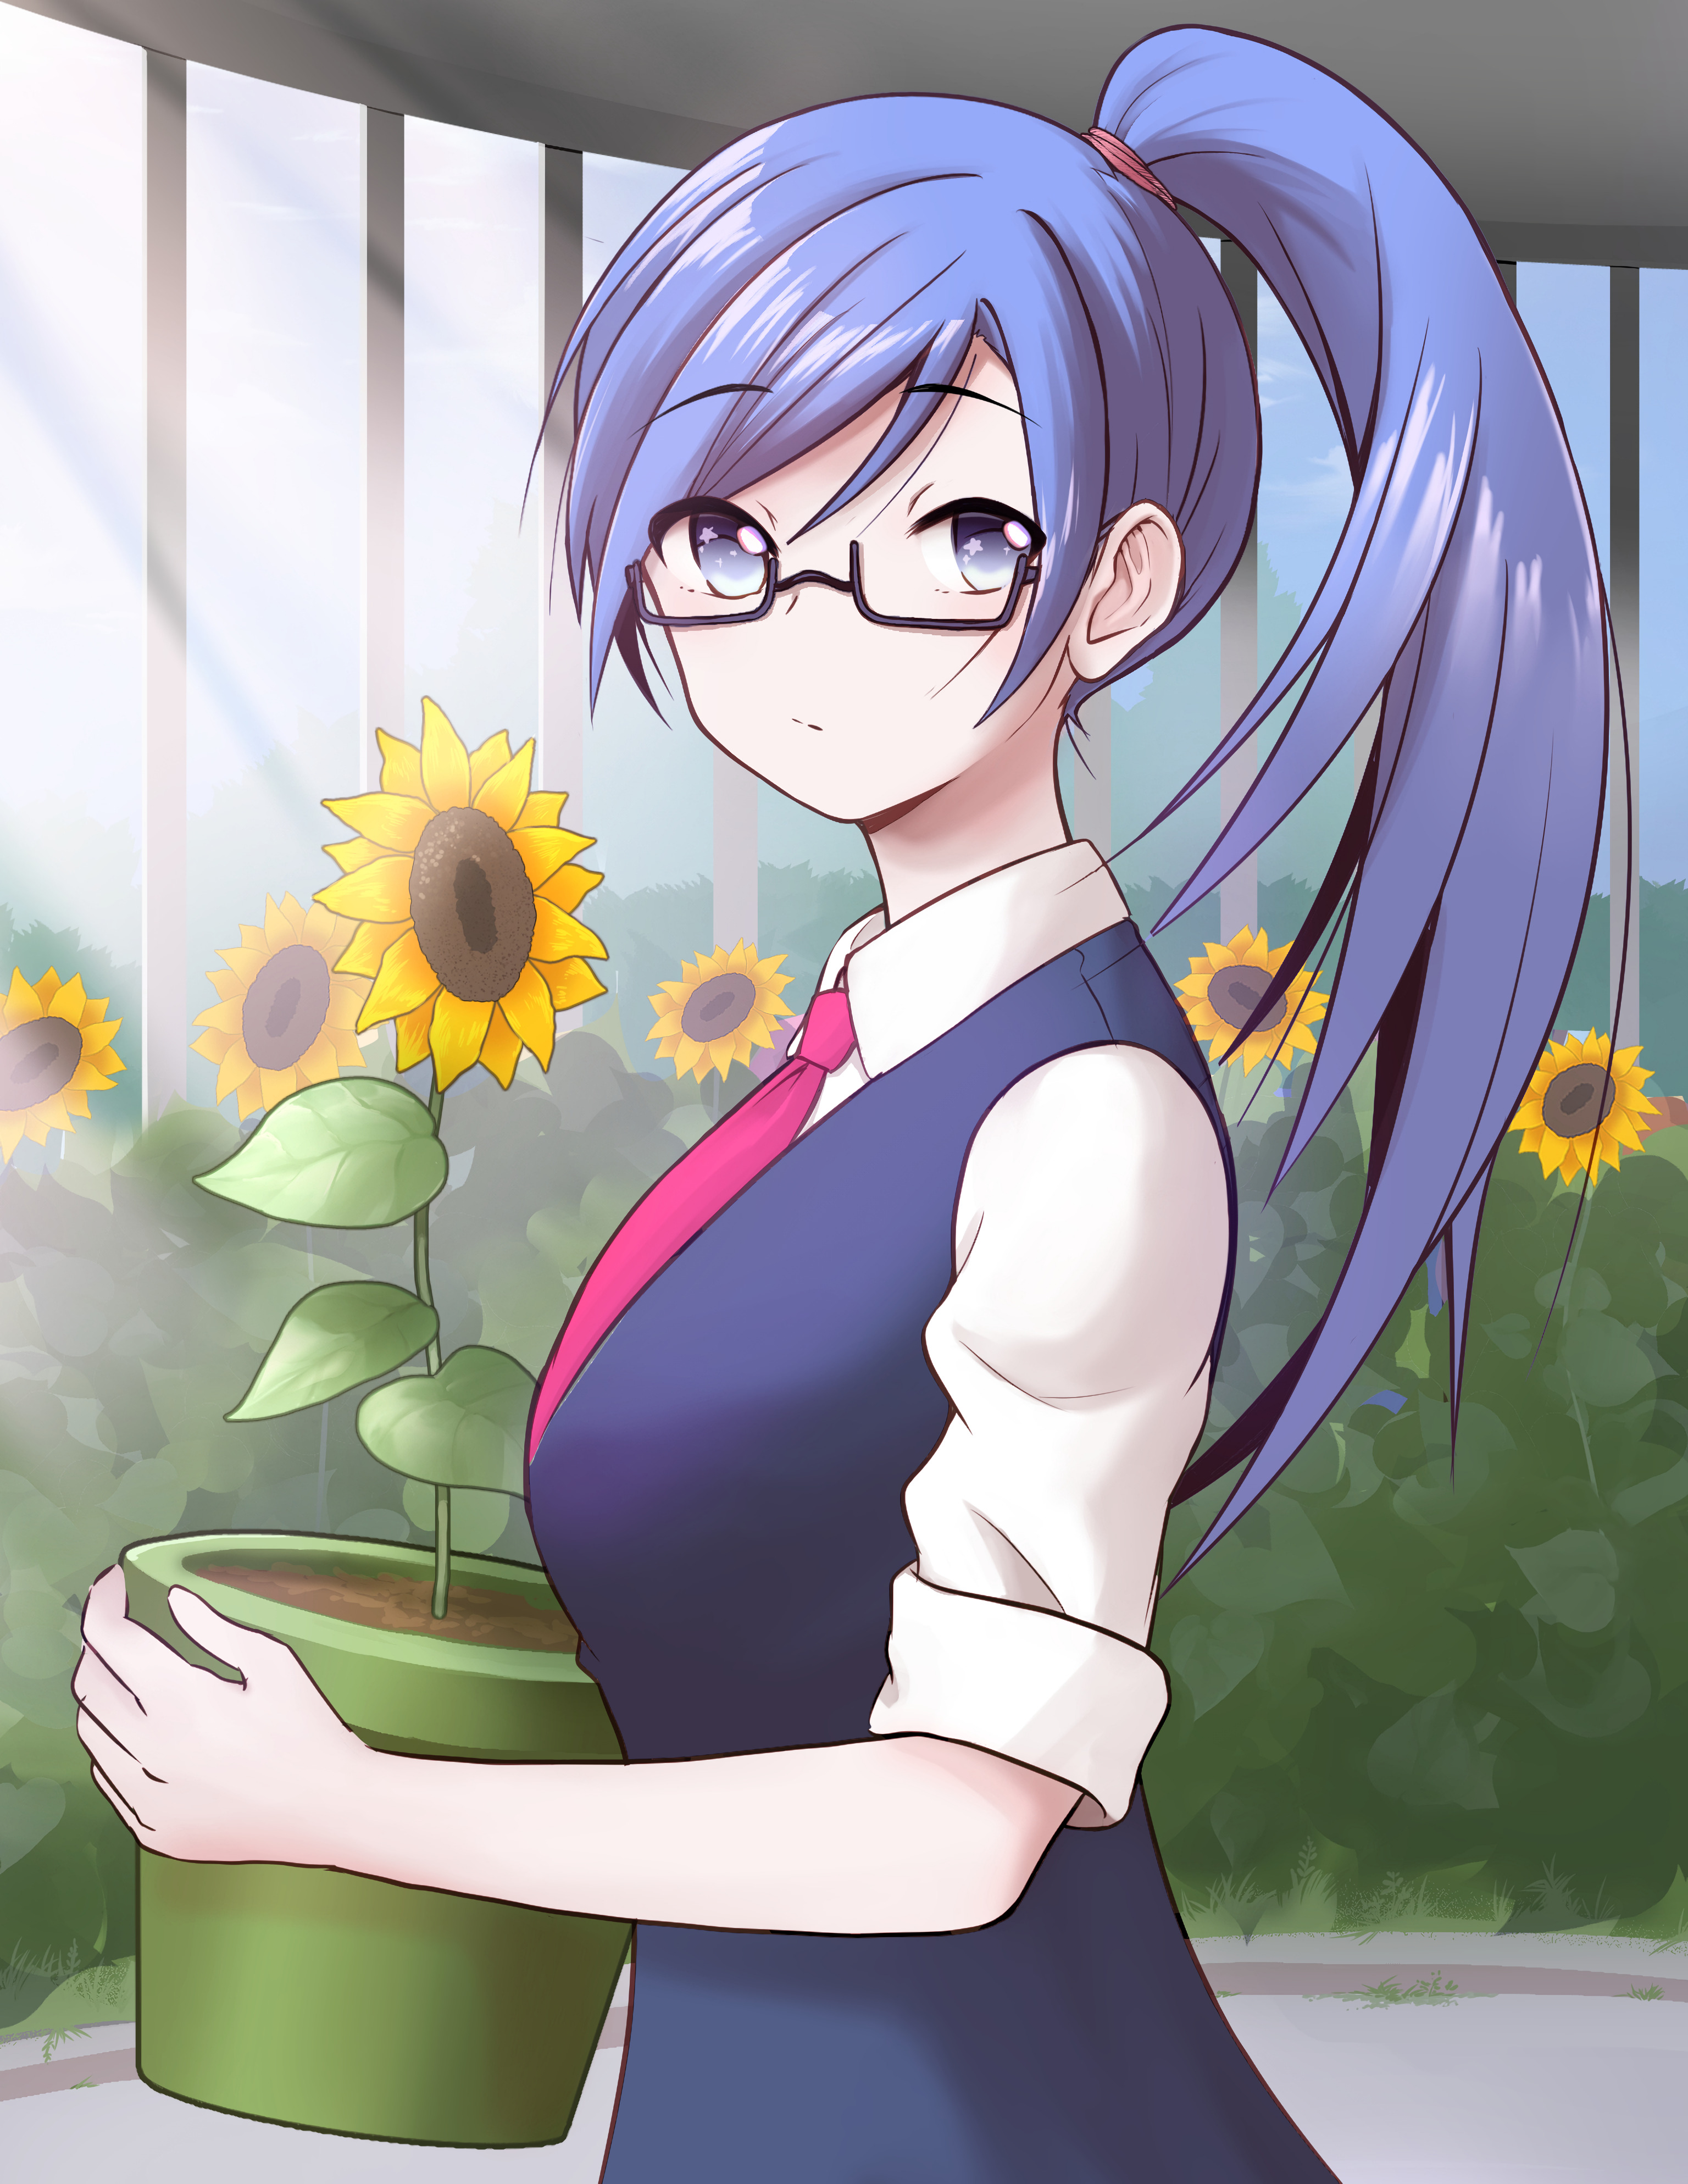 146973 Screensavers and Wallpapers Glasses for phone. Download anime, flowers, sunflowers, girl, glasses, spectacles pictures for free